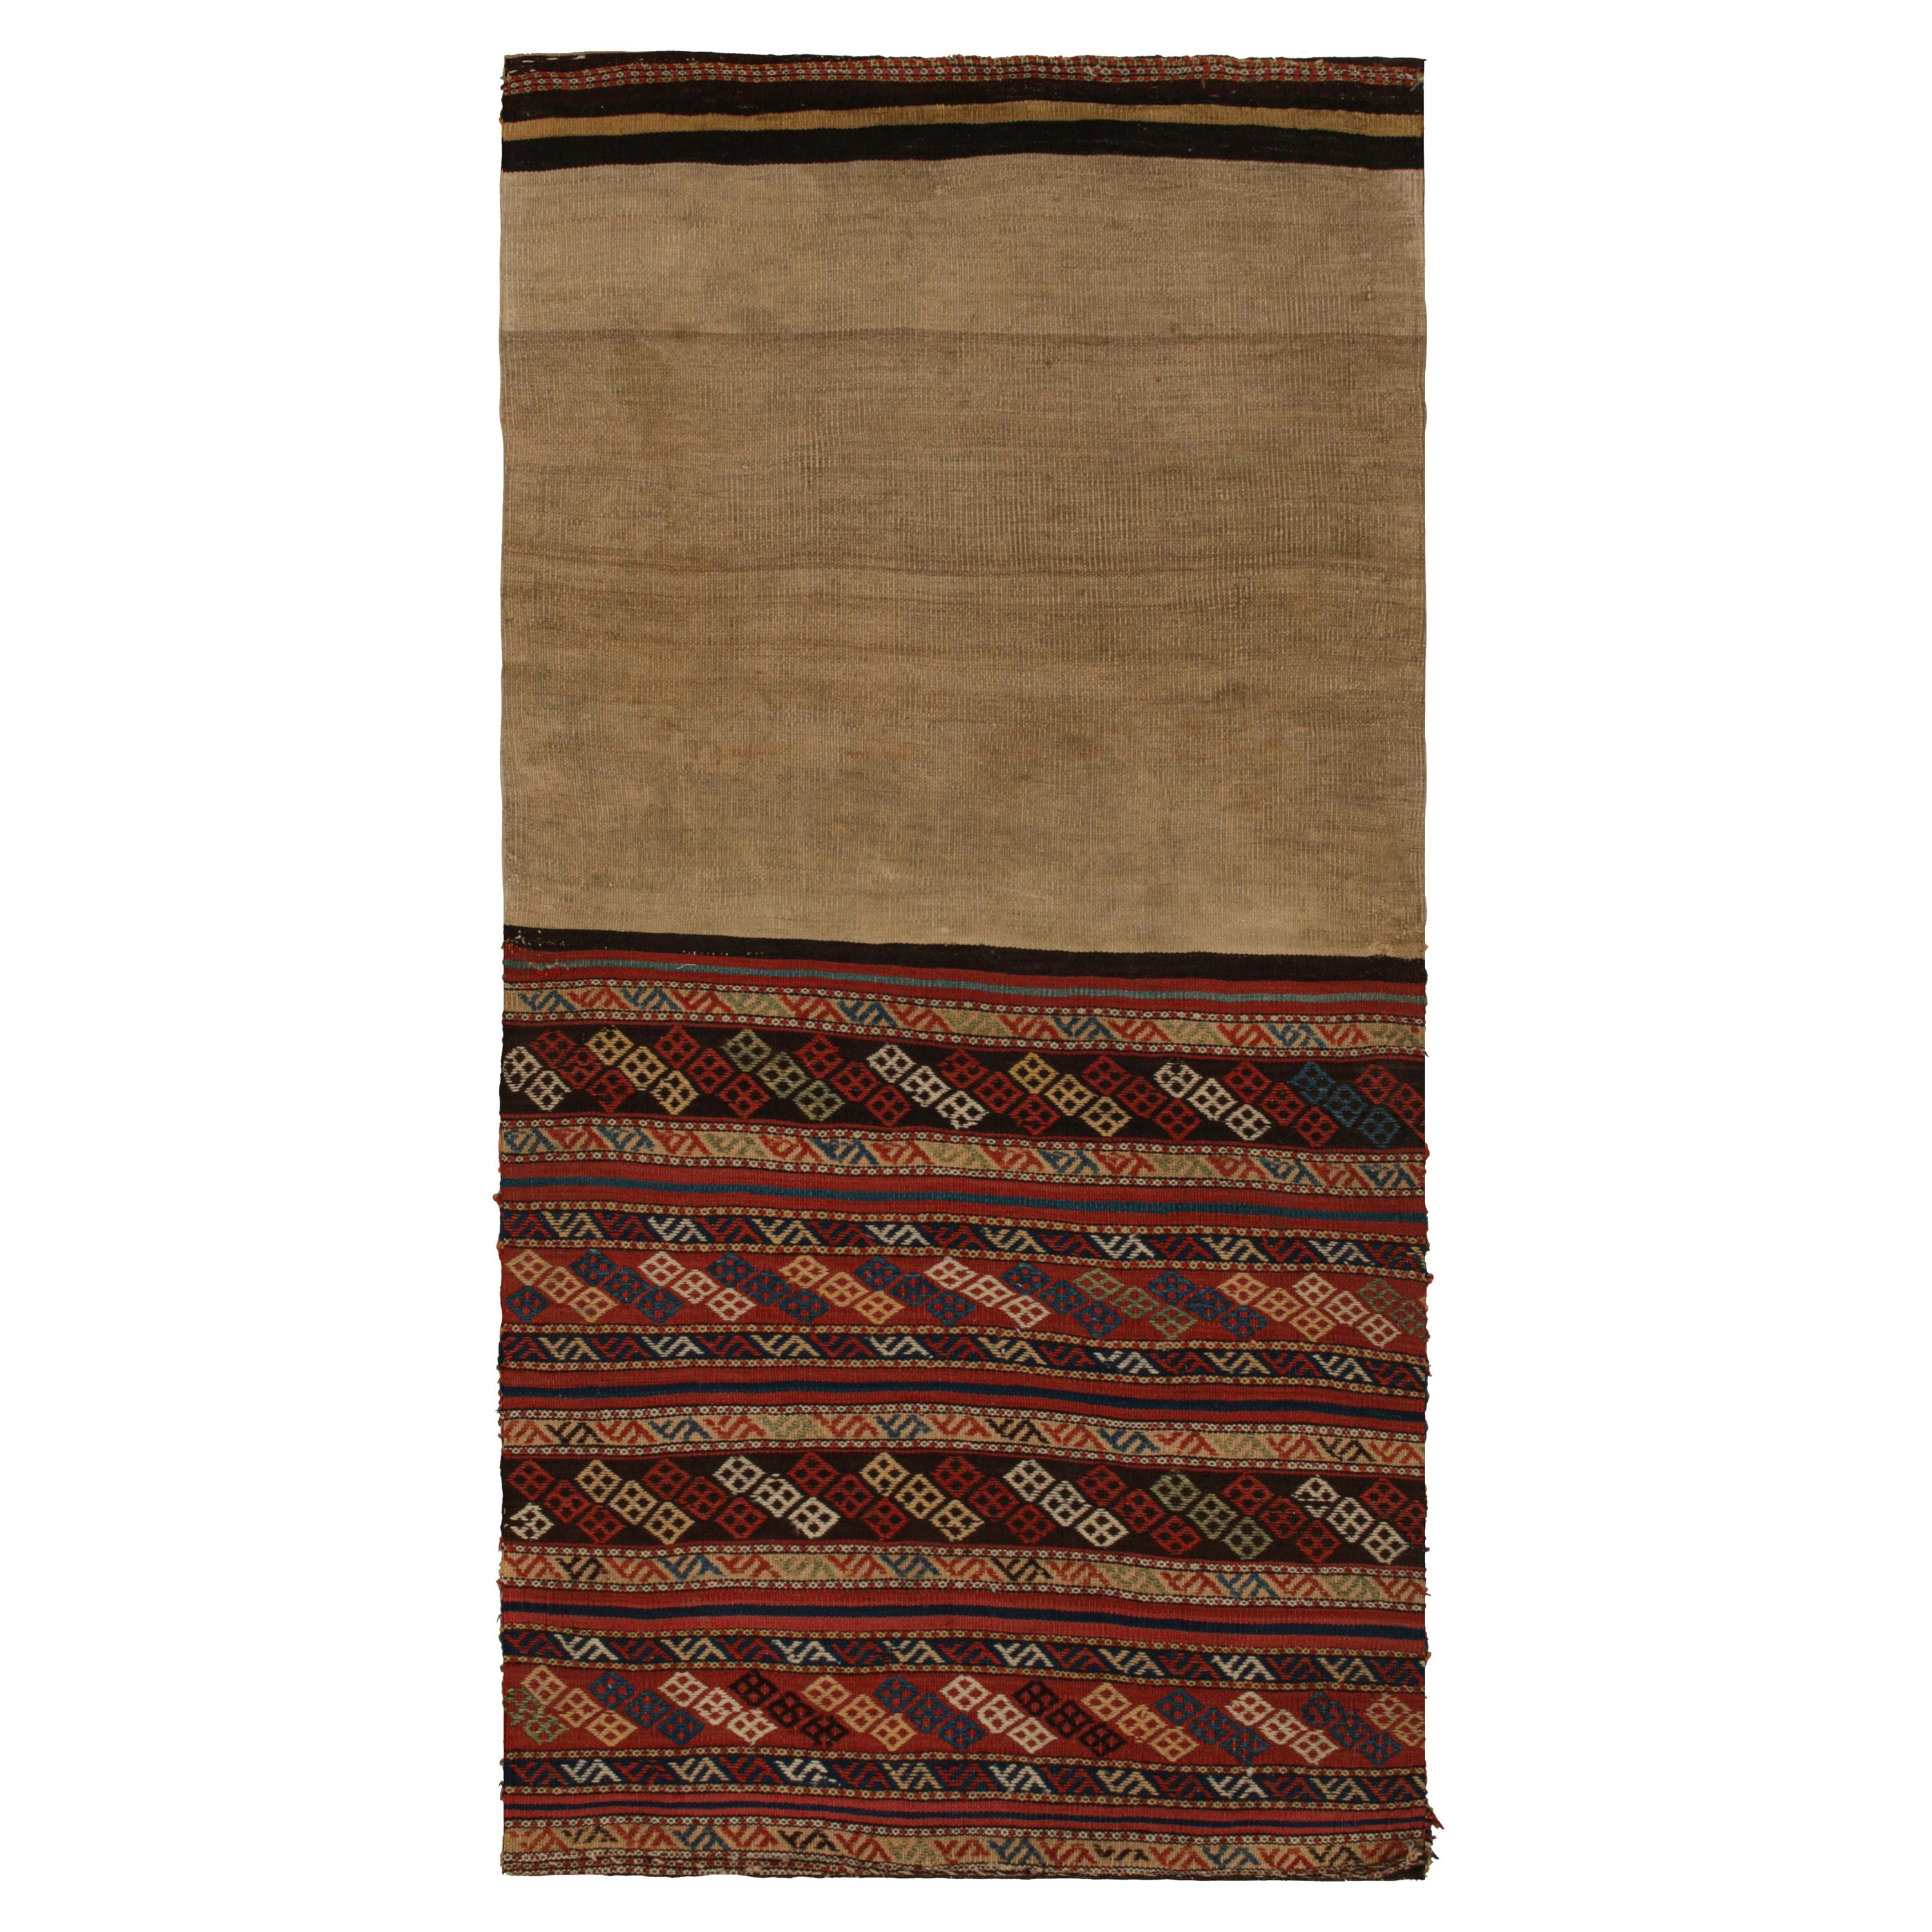 Antique Persian Bag Kilim Runner with Geometric Patterns, from Rug & Kilim